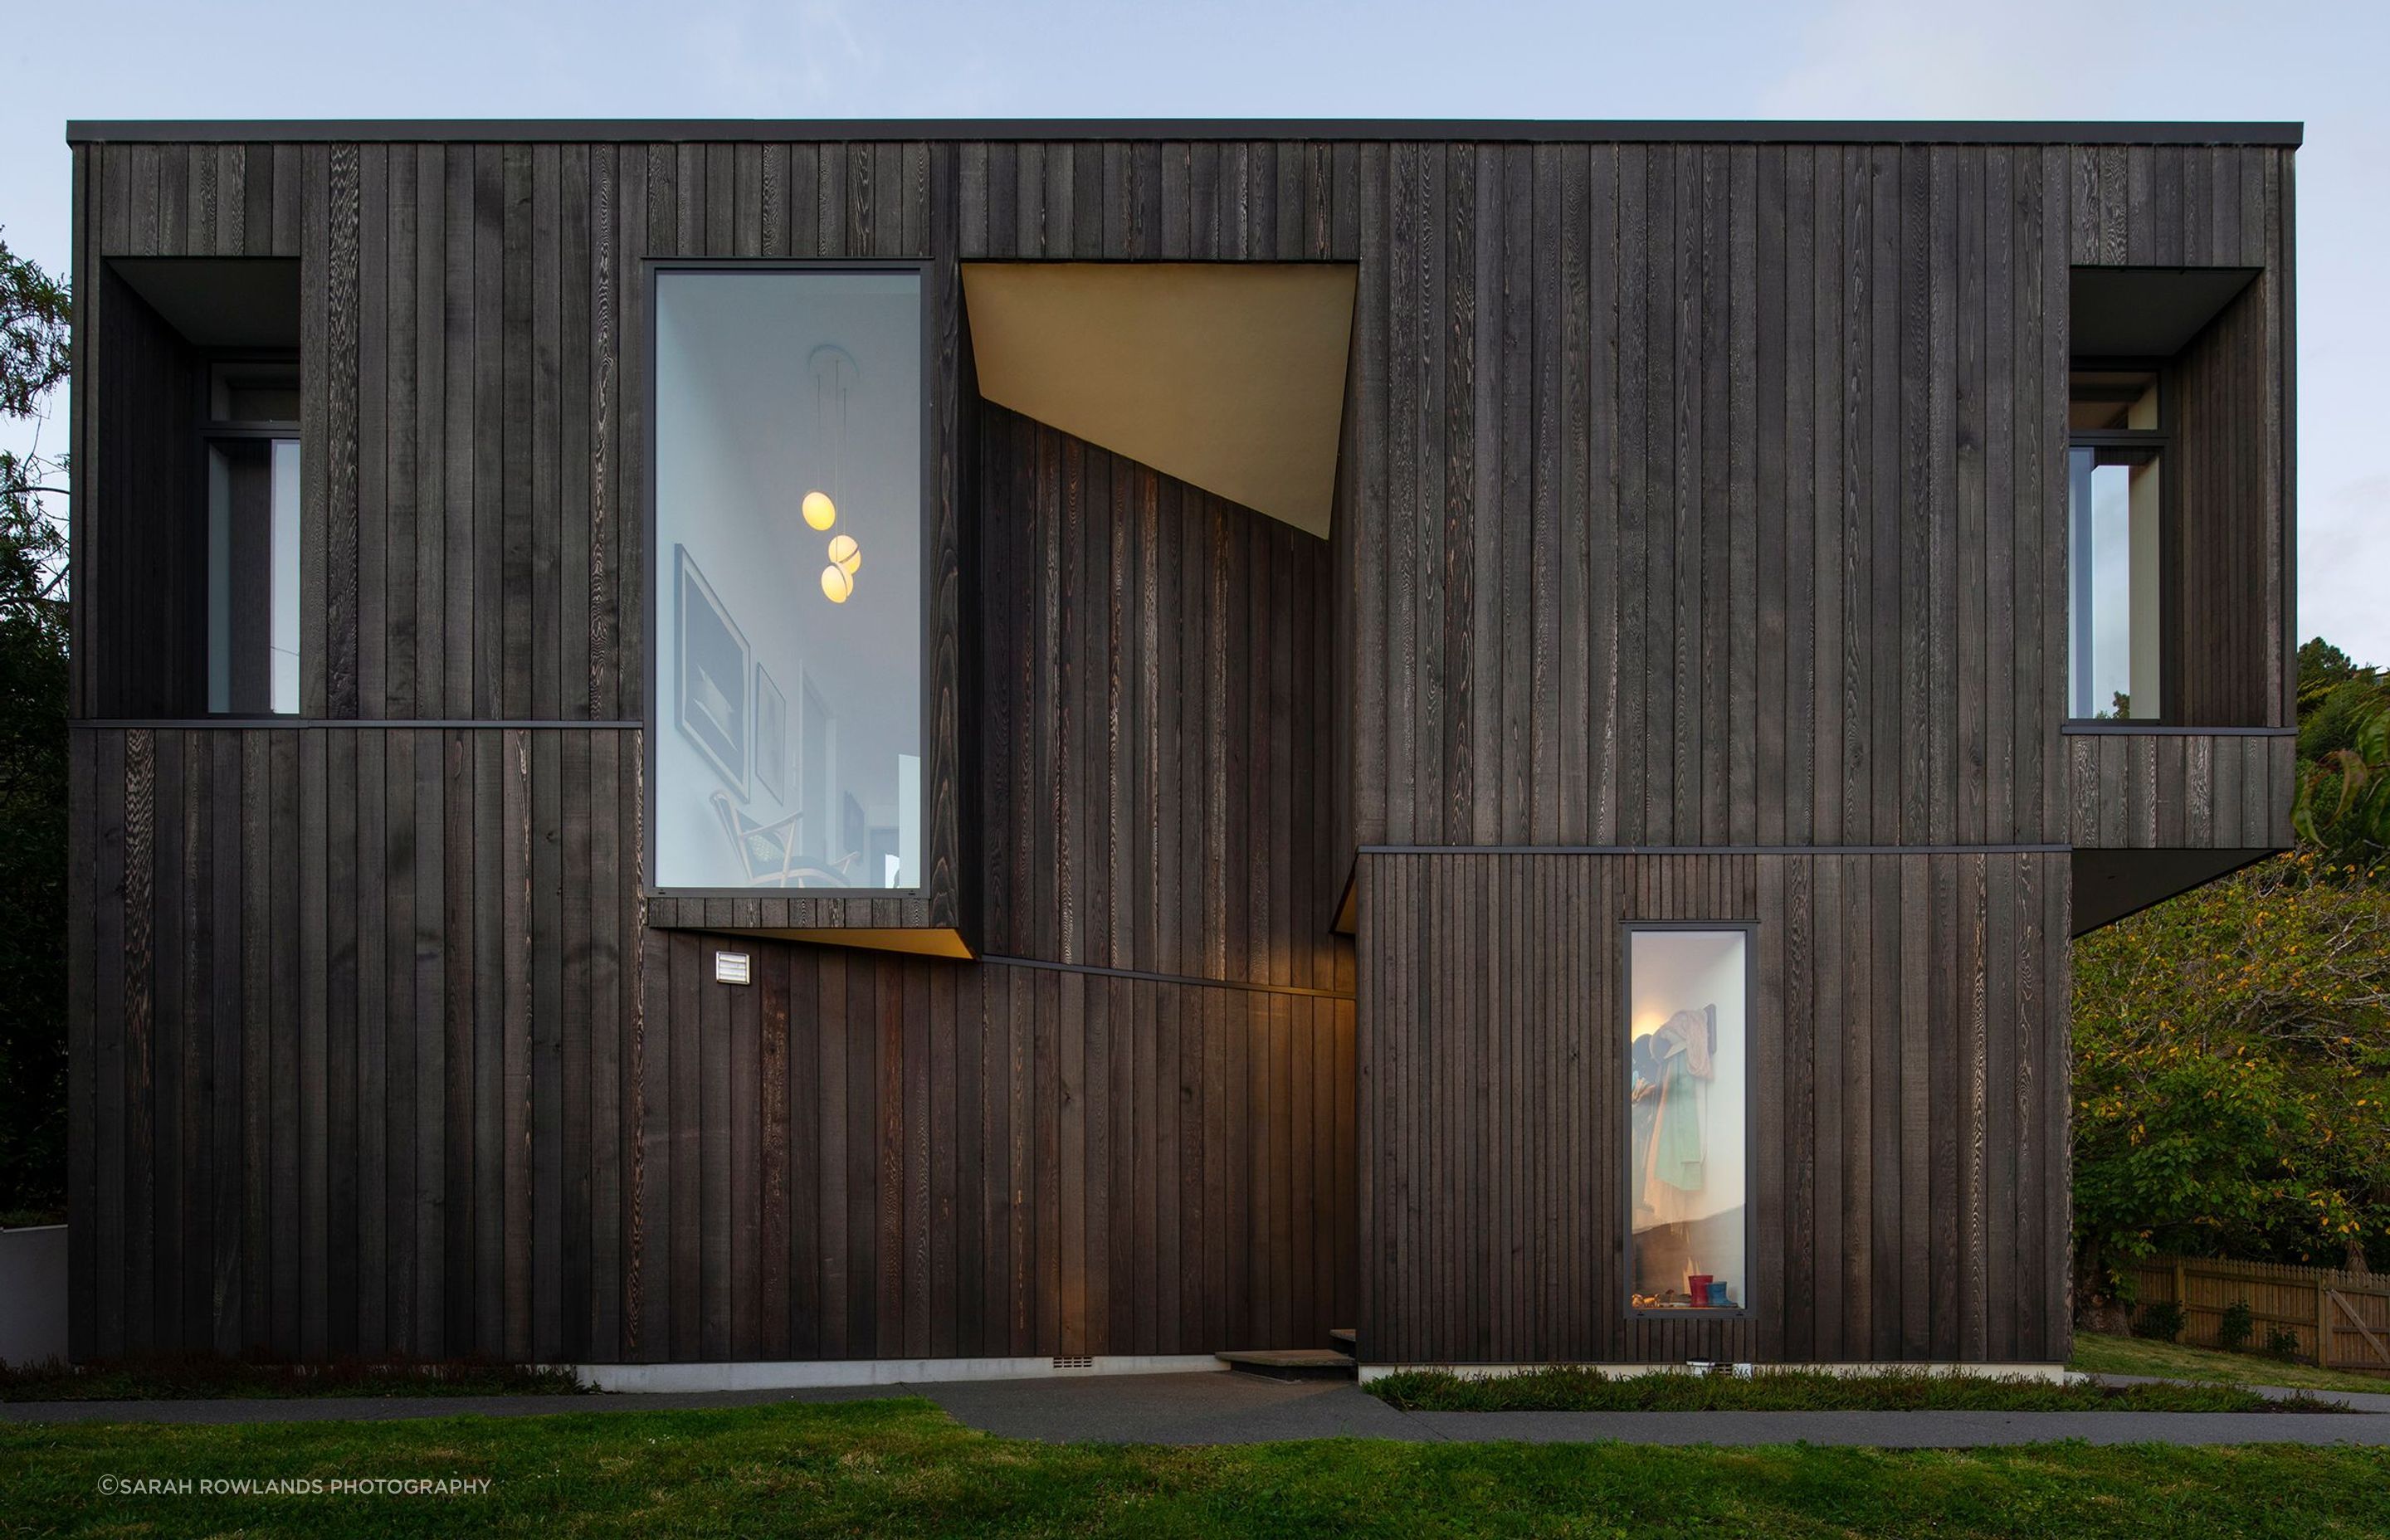 The home's folded geometry celebrates strong shapes with interesting cut-outs that reflect the nearby rocky outcrop of the Port Hills.